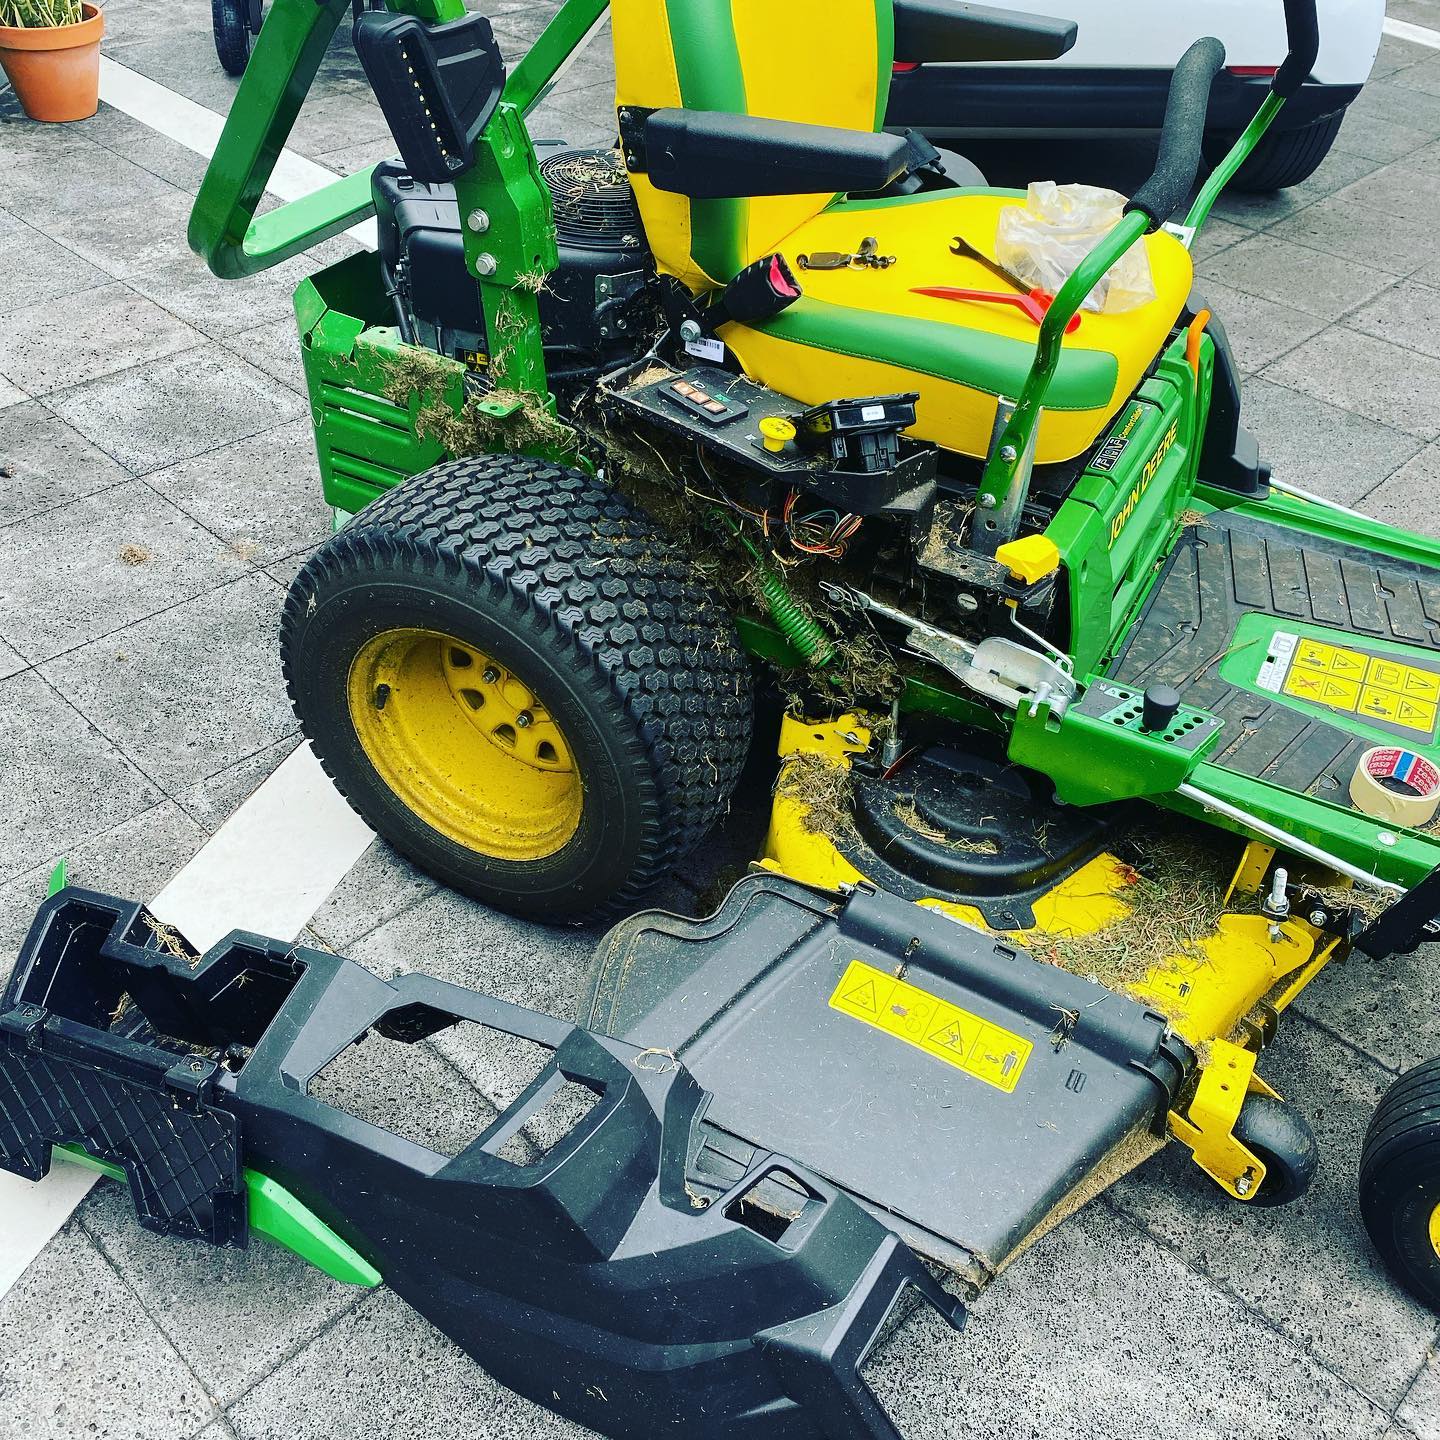 I have quite a busy day, so why not make it even busier by taking the mower apart to install some Bluetooth ? (And no, don’t ask why do I need Bluetooth in a darn mower !)